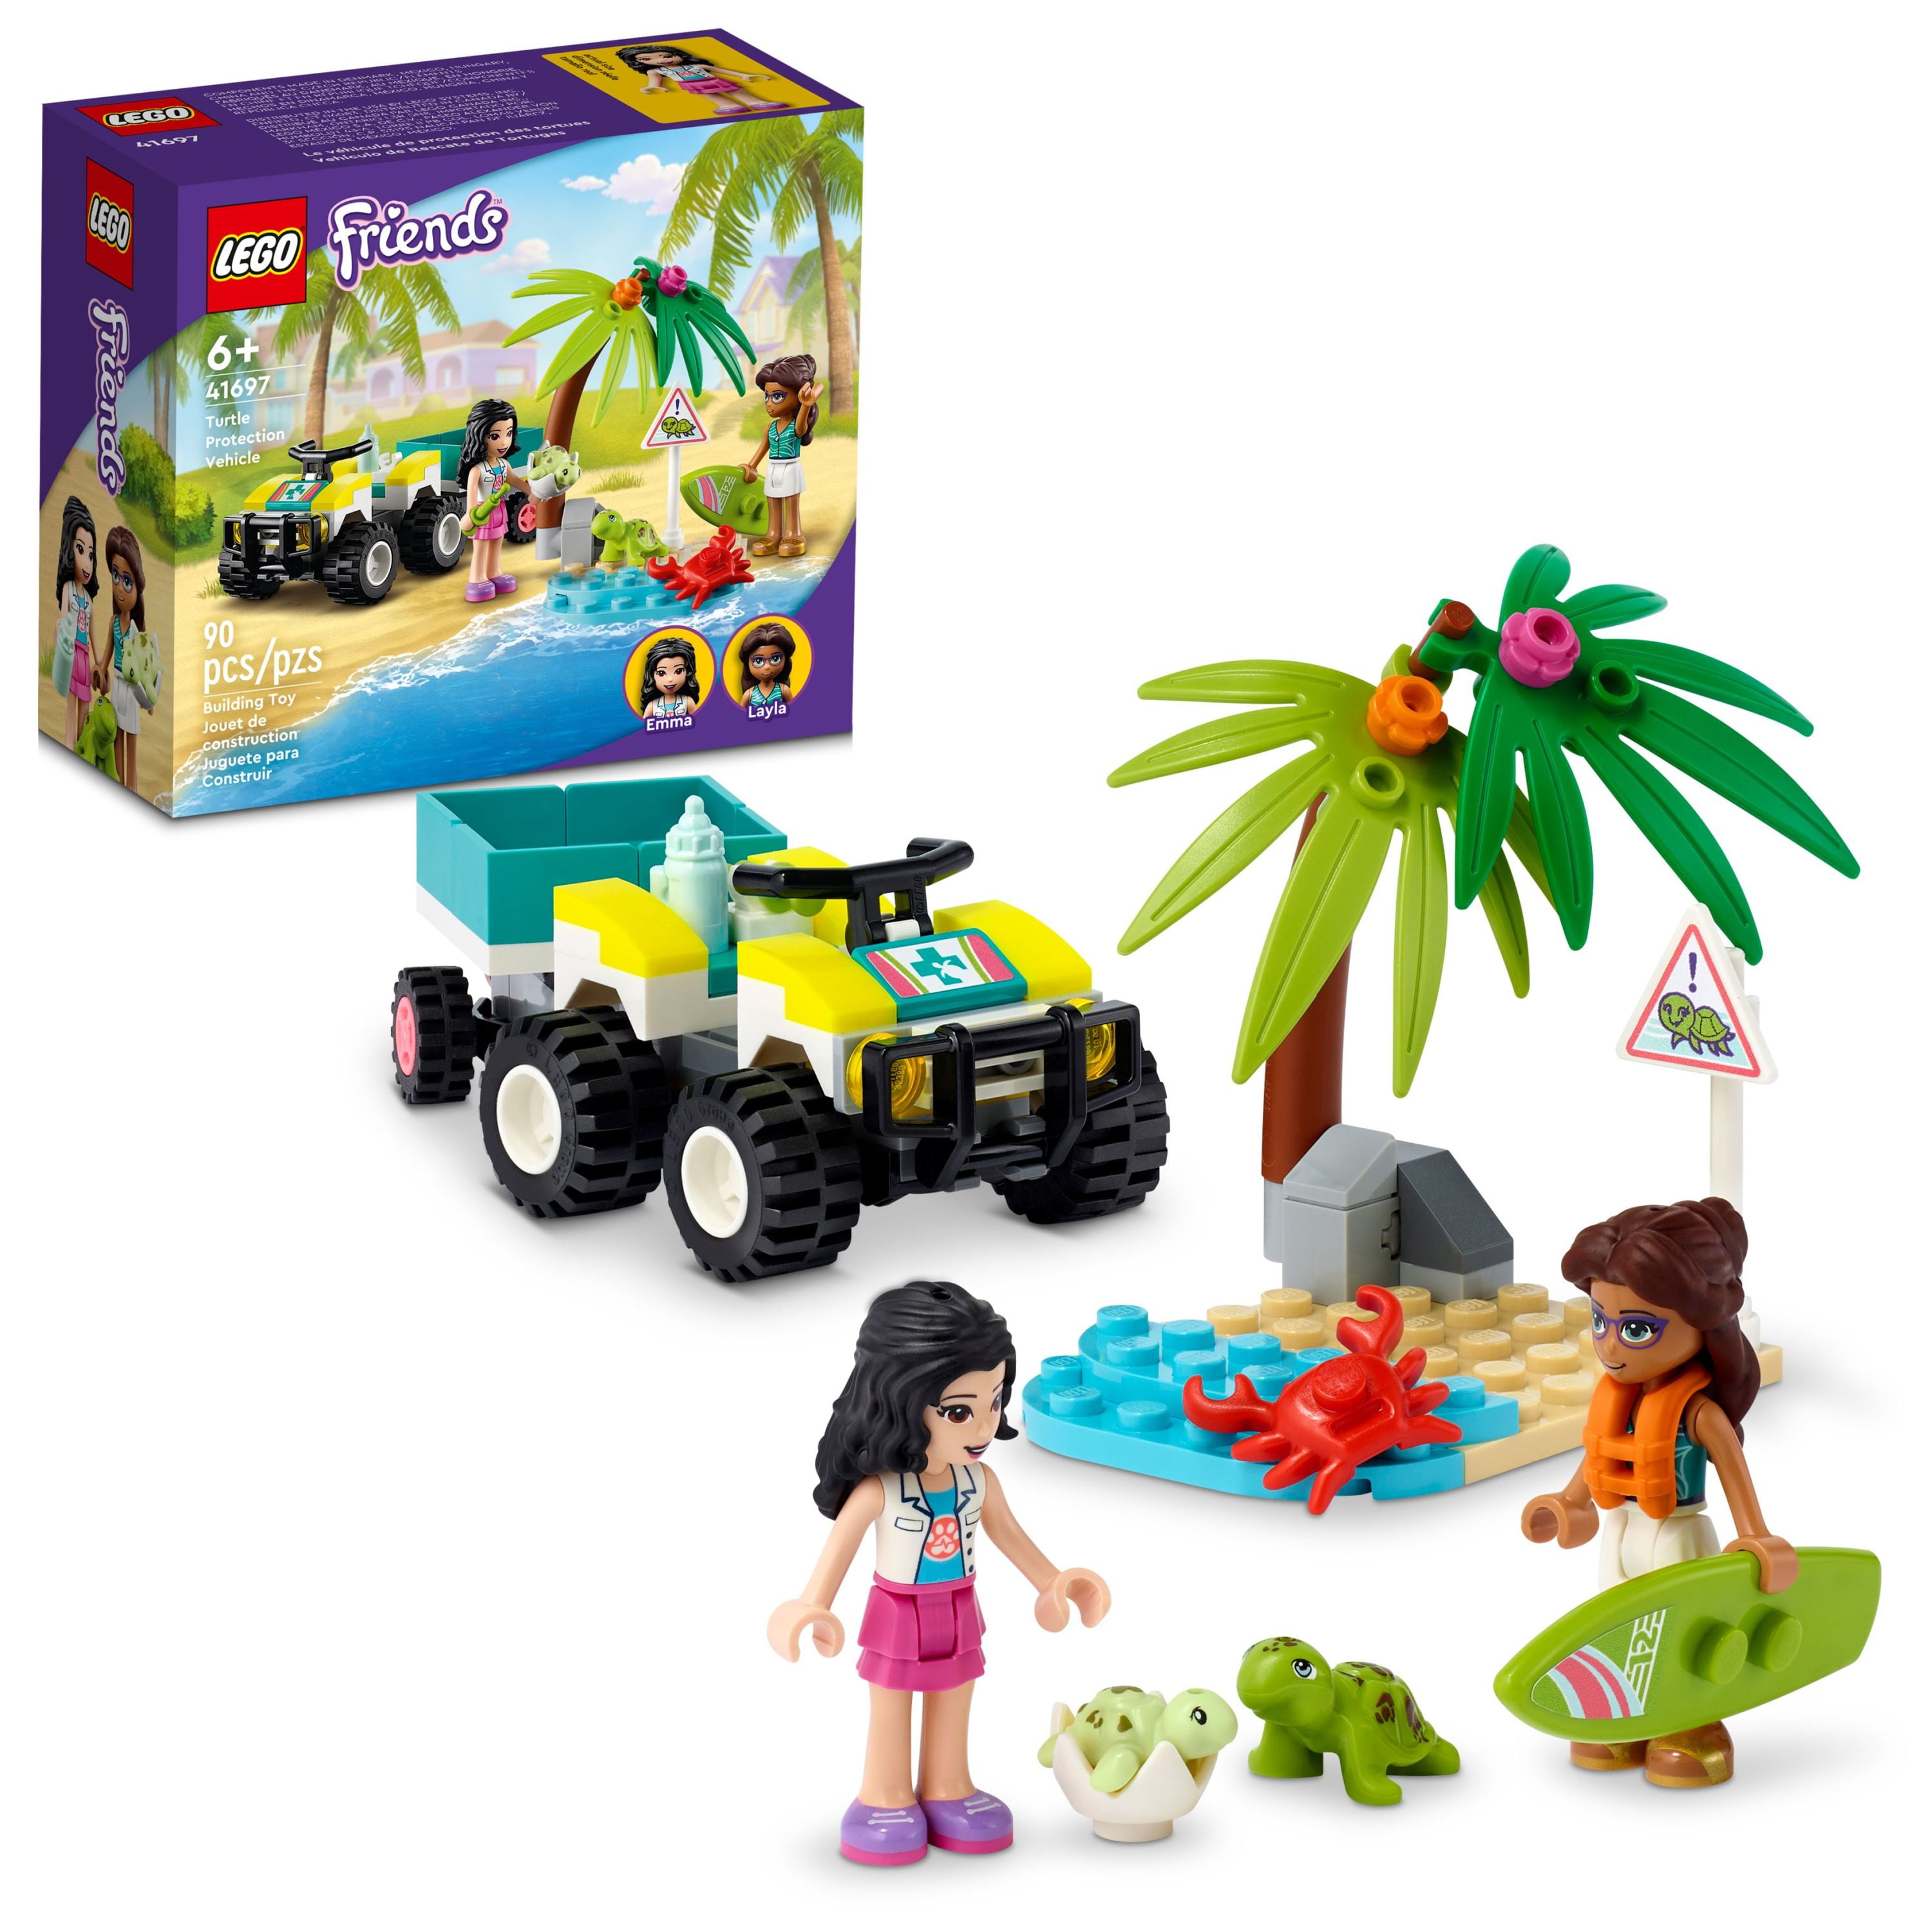 LEGO Friends Turtle Protection Vehicle 41697, Sea Animal Rescue Toy for Kids 6 plus Years Old, Beach ATV Car with Trailer Building Set